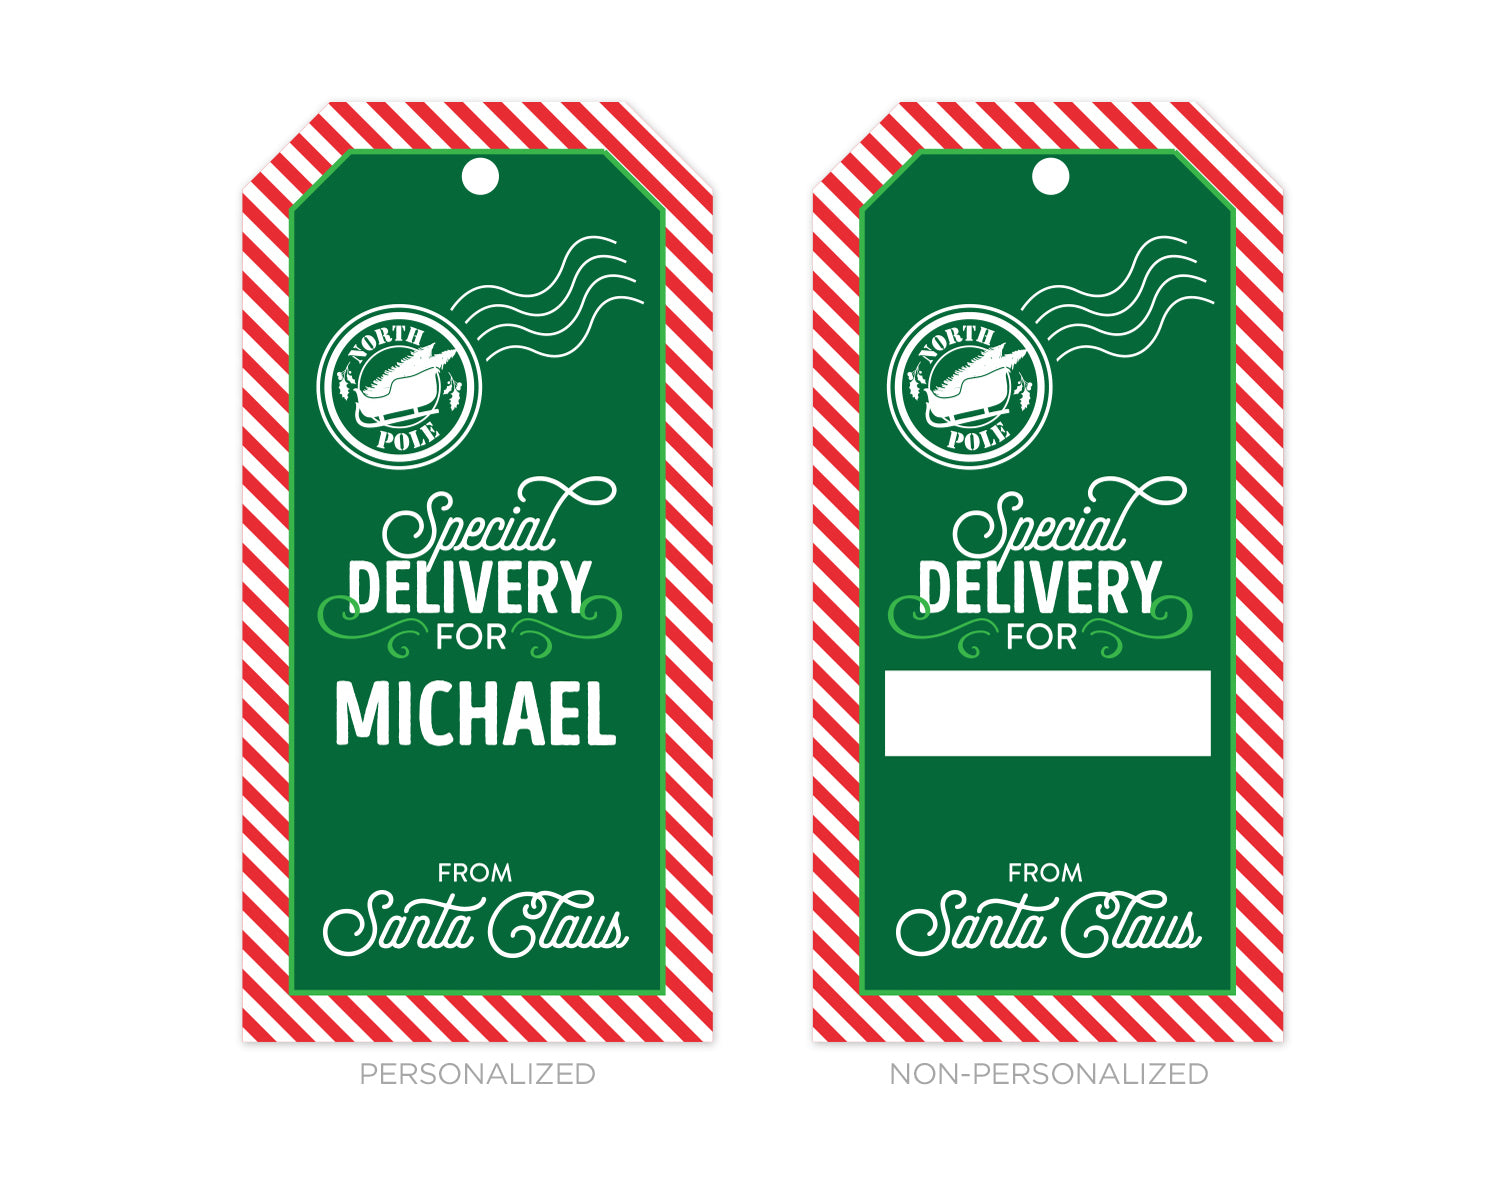 Happy Holidays on a String - Round Personalized Christmas Sticker Labels